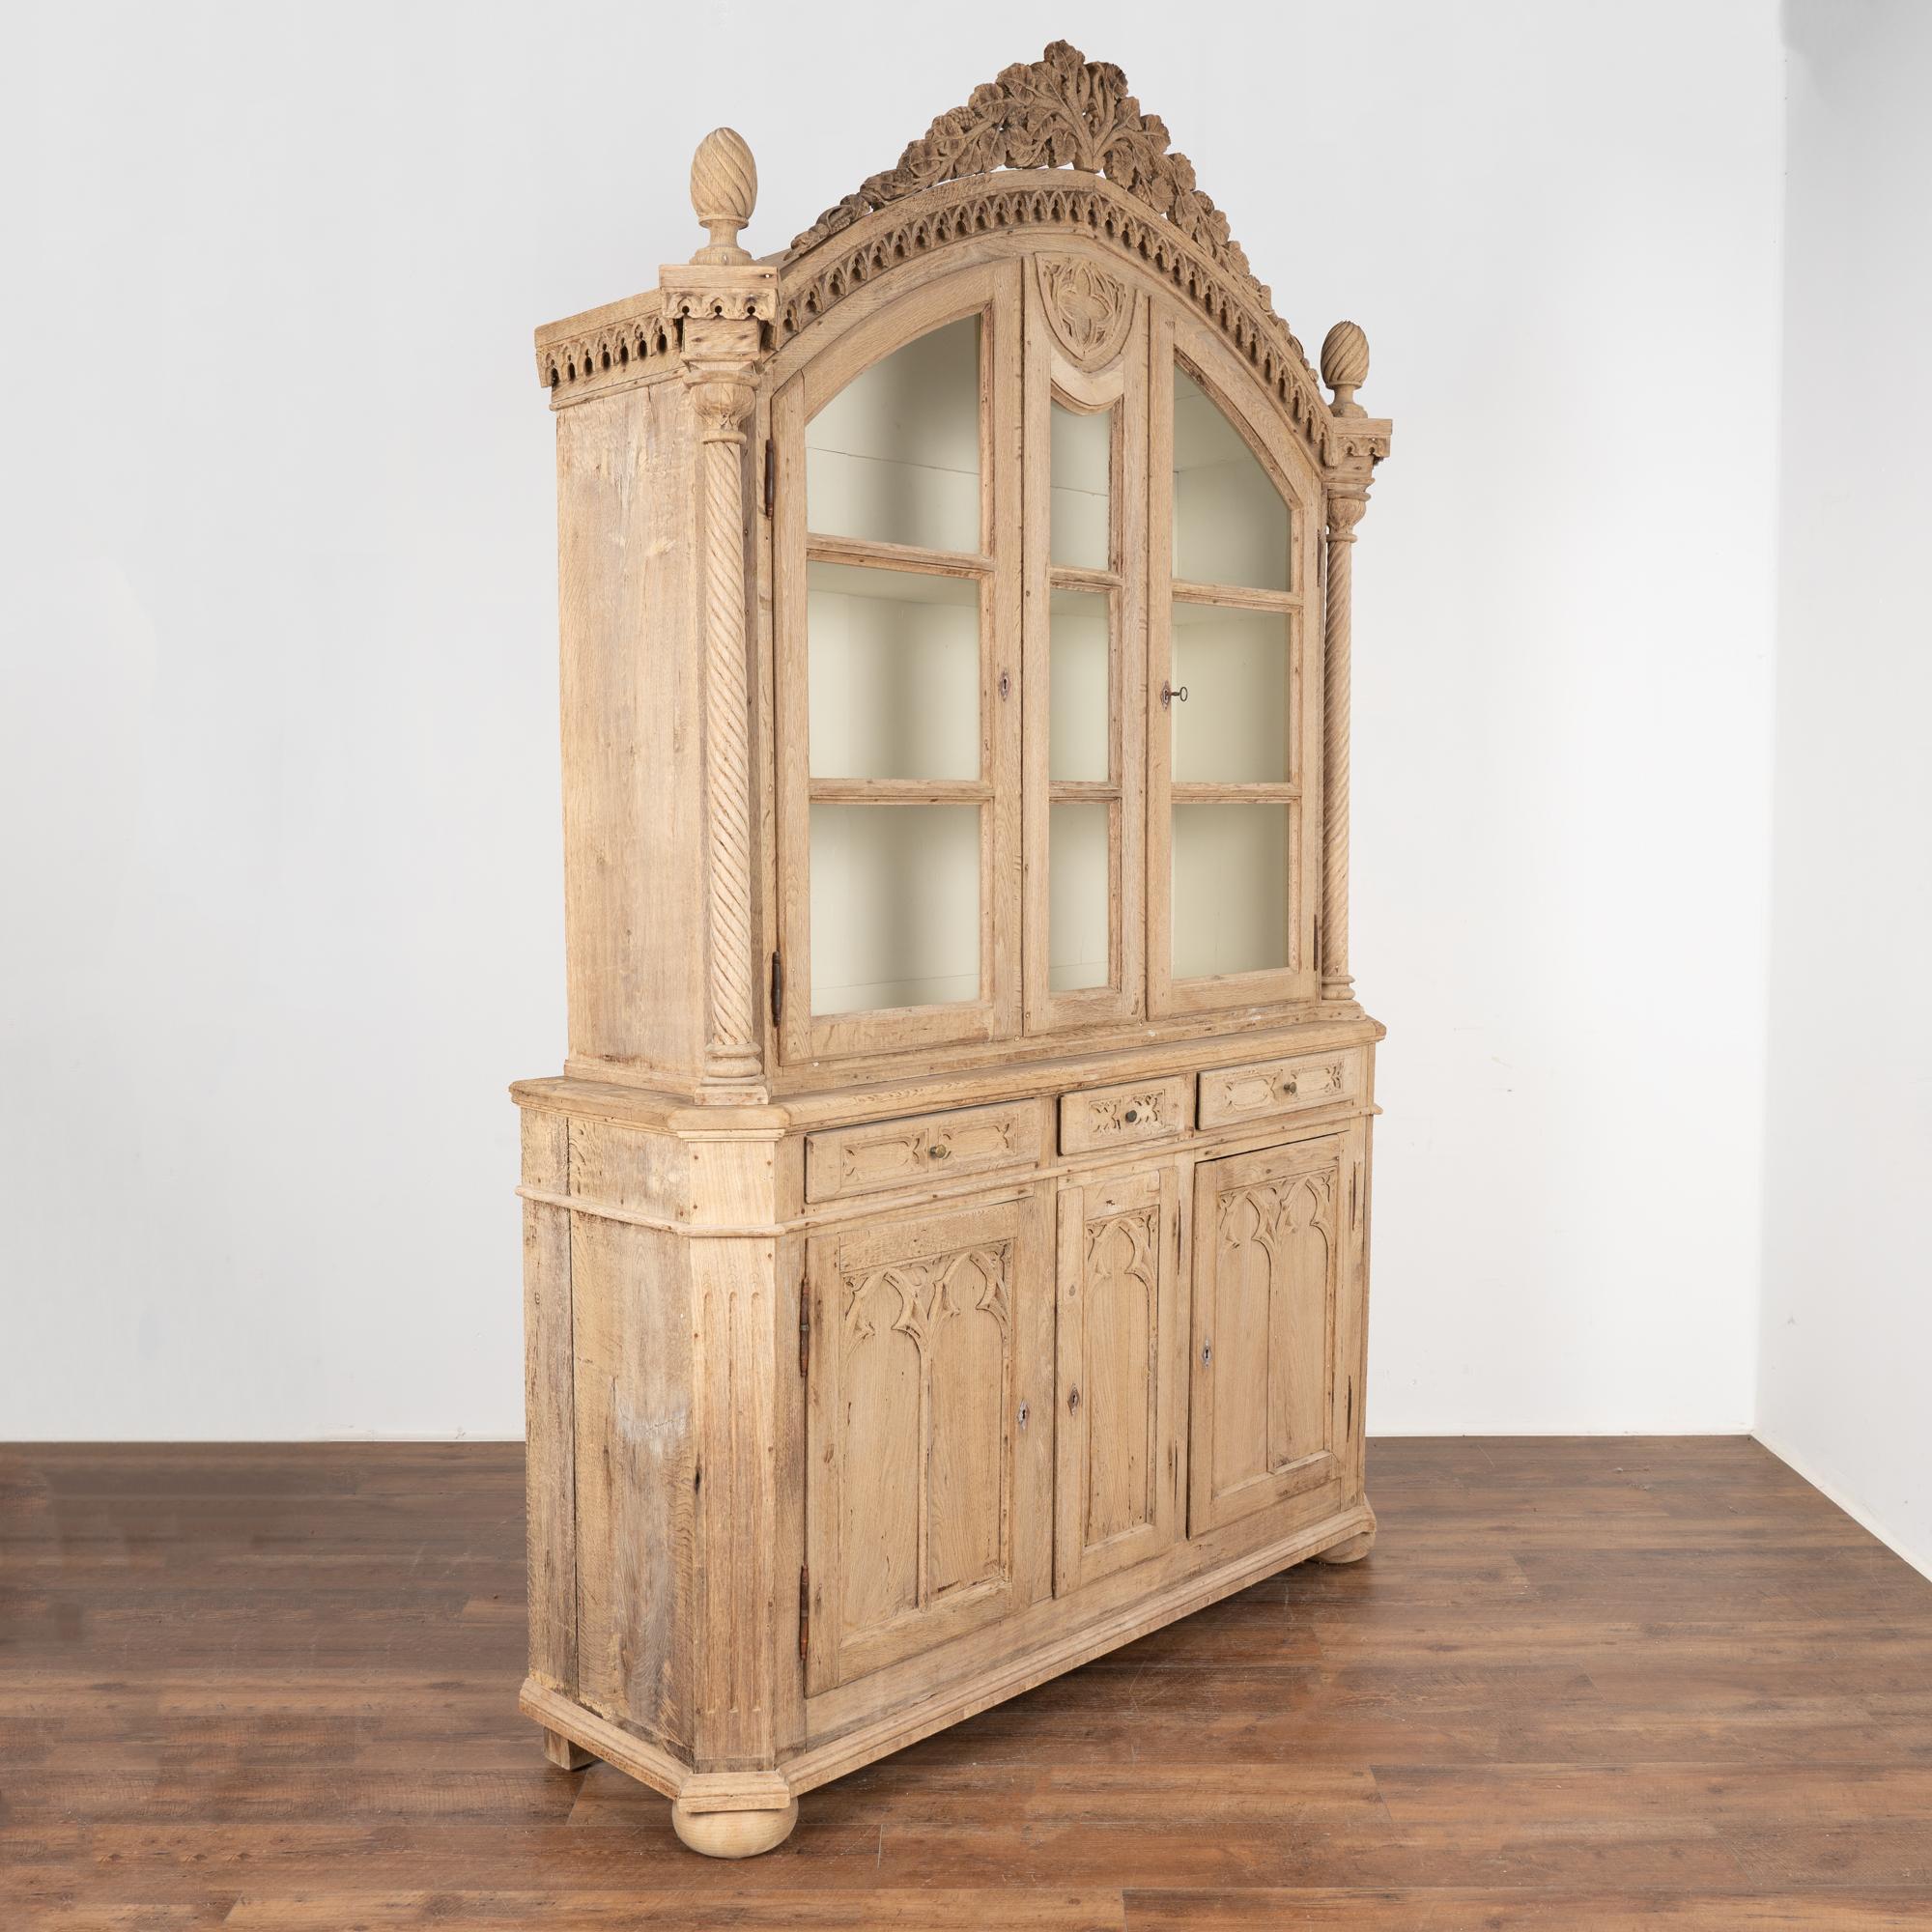 This large bleached oak bookcase has intricate details such as the gothic trim that accents the crown and panel doors in addition to the dramatic turned columns, finials and more.
The interior of the cabinet has been painted, allowing for great